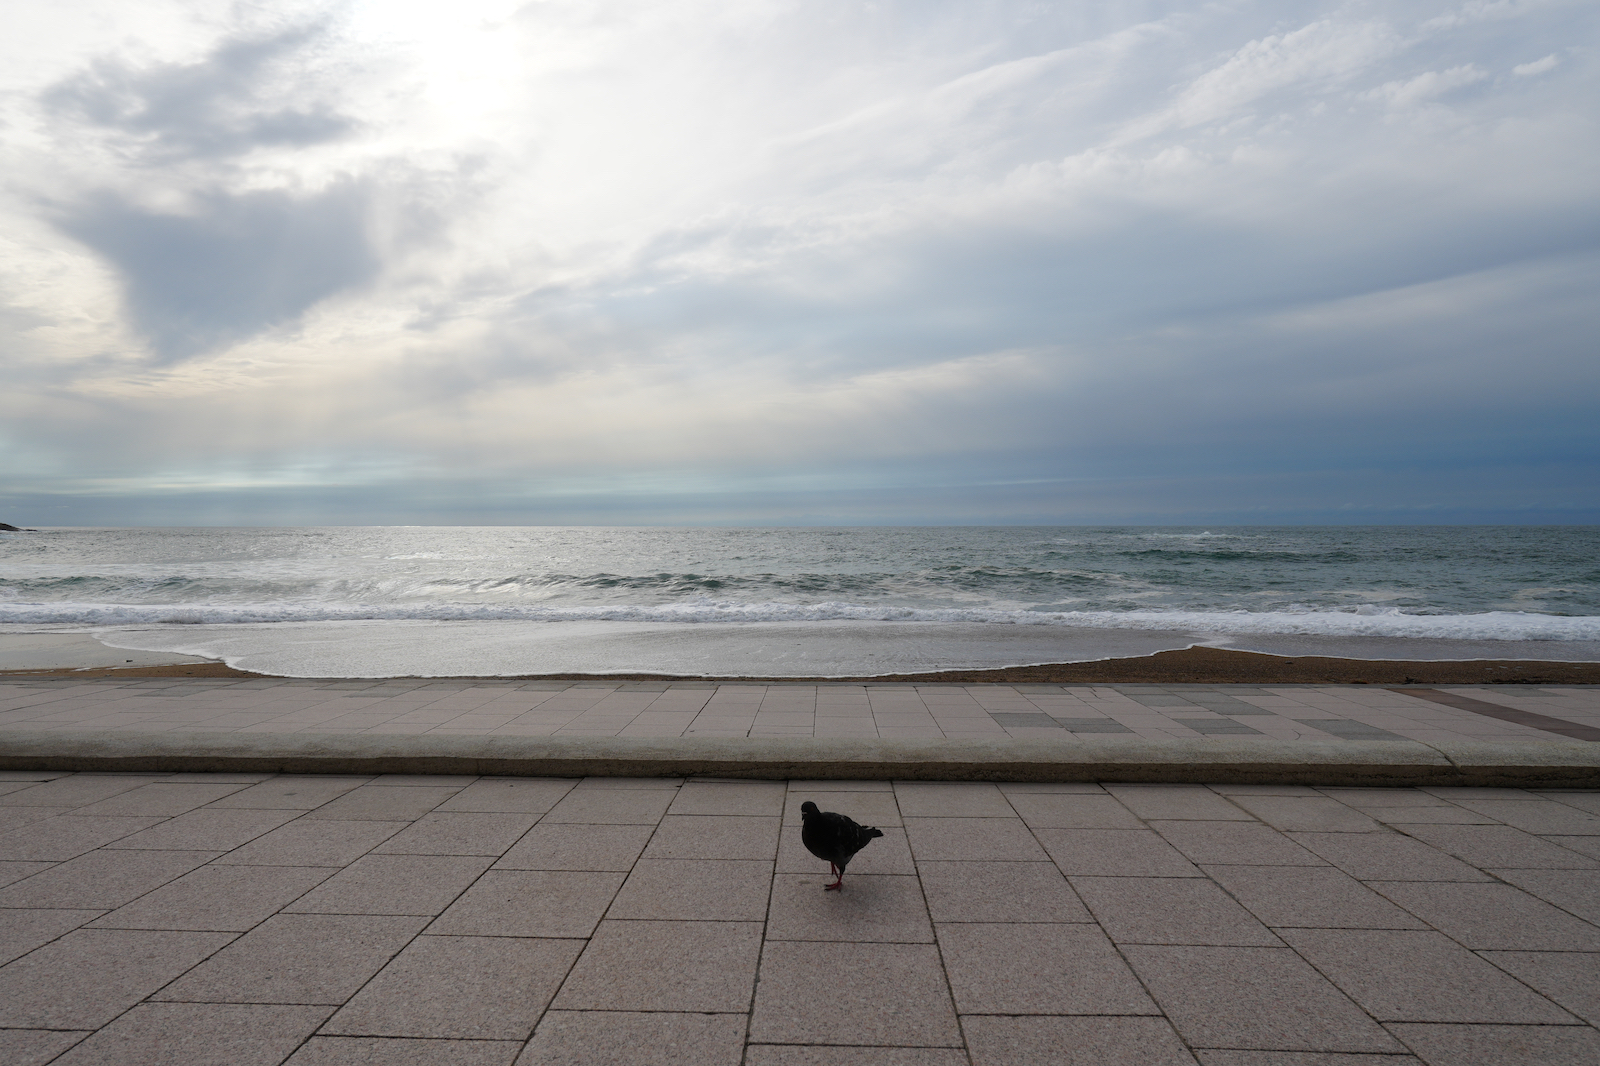 Sample image shot using the Sony Alpha A6700 of the beach in Biarritz